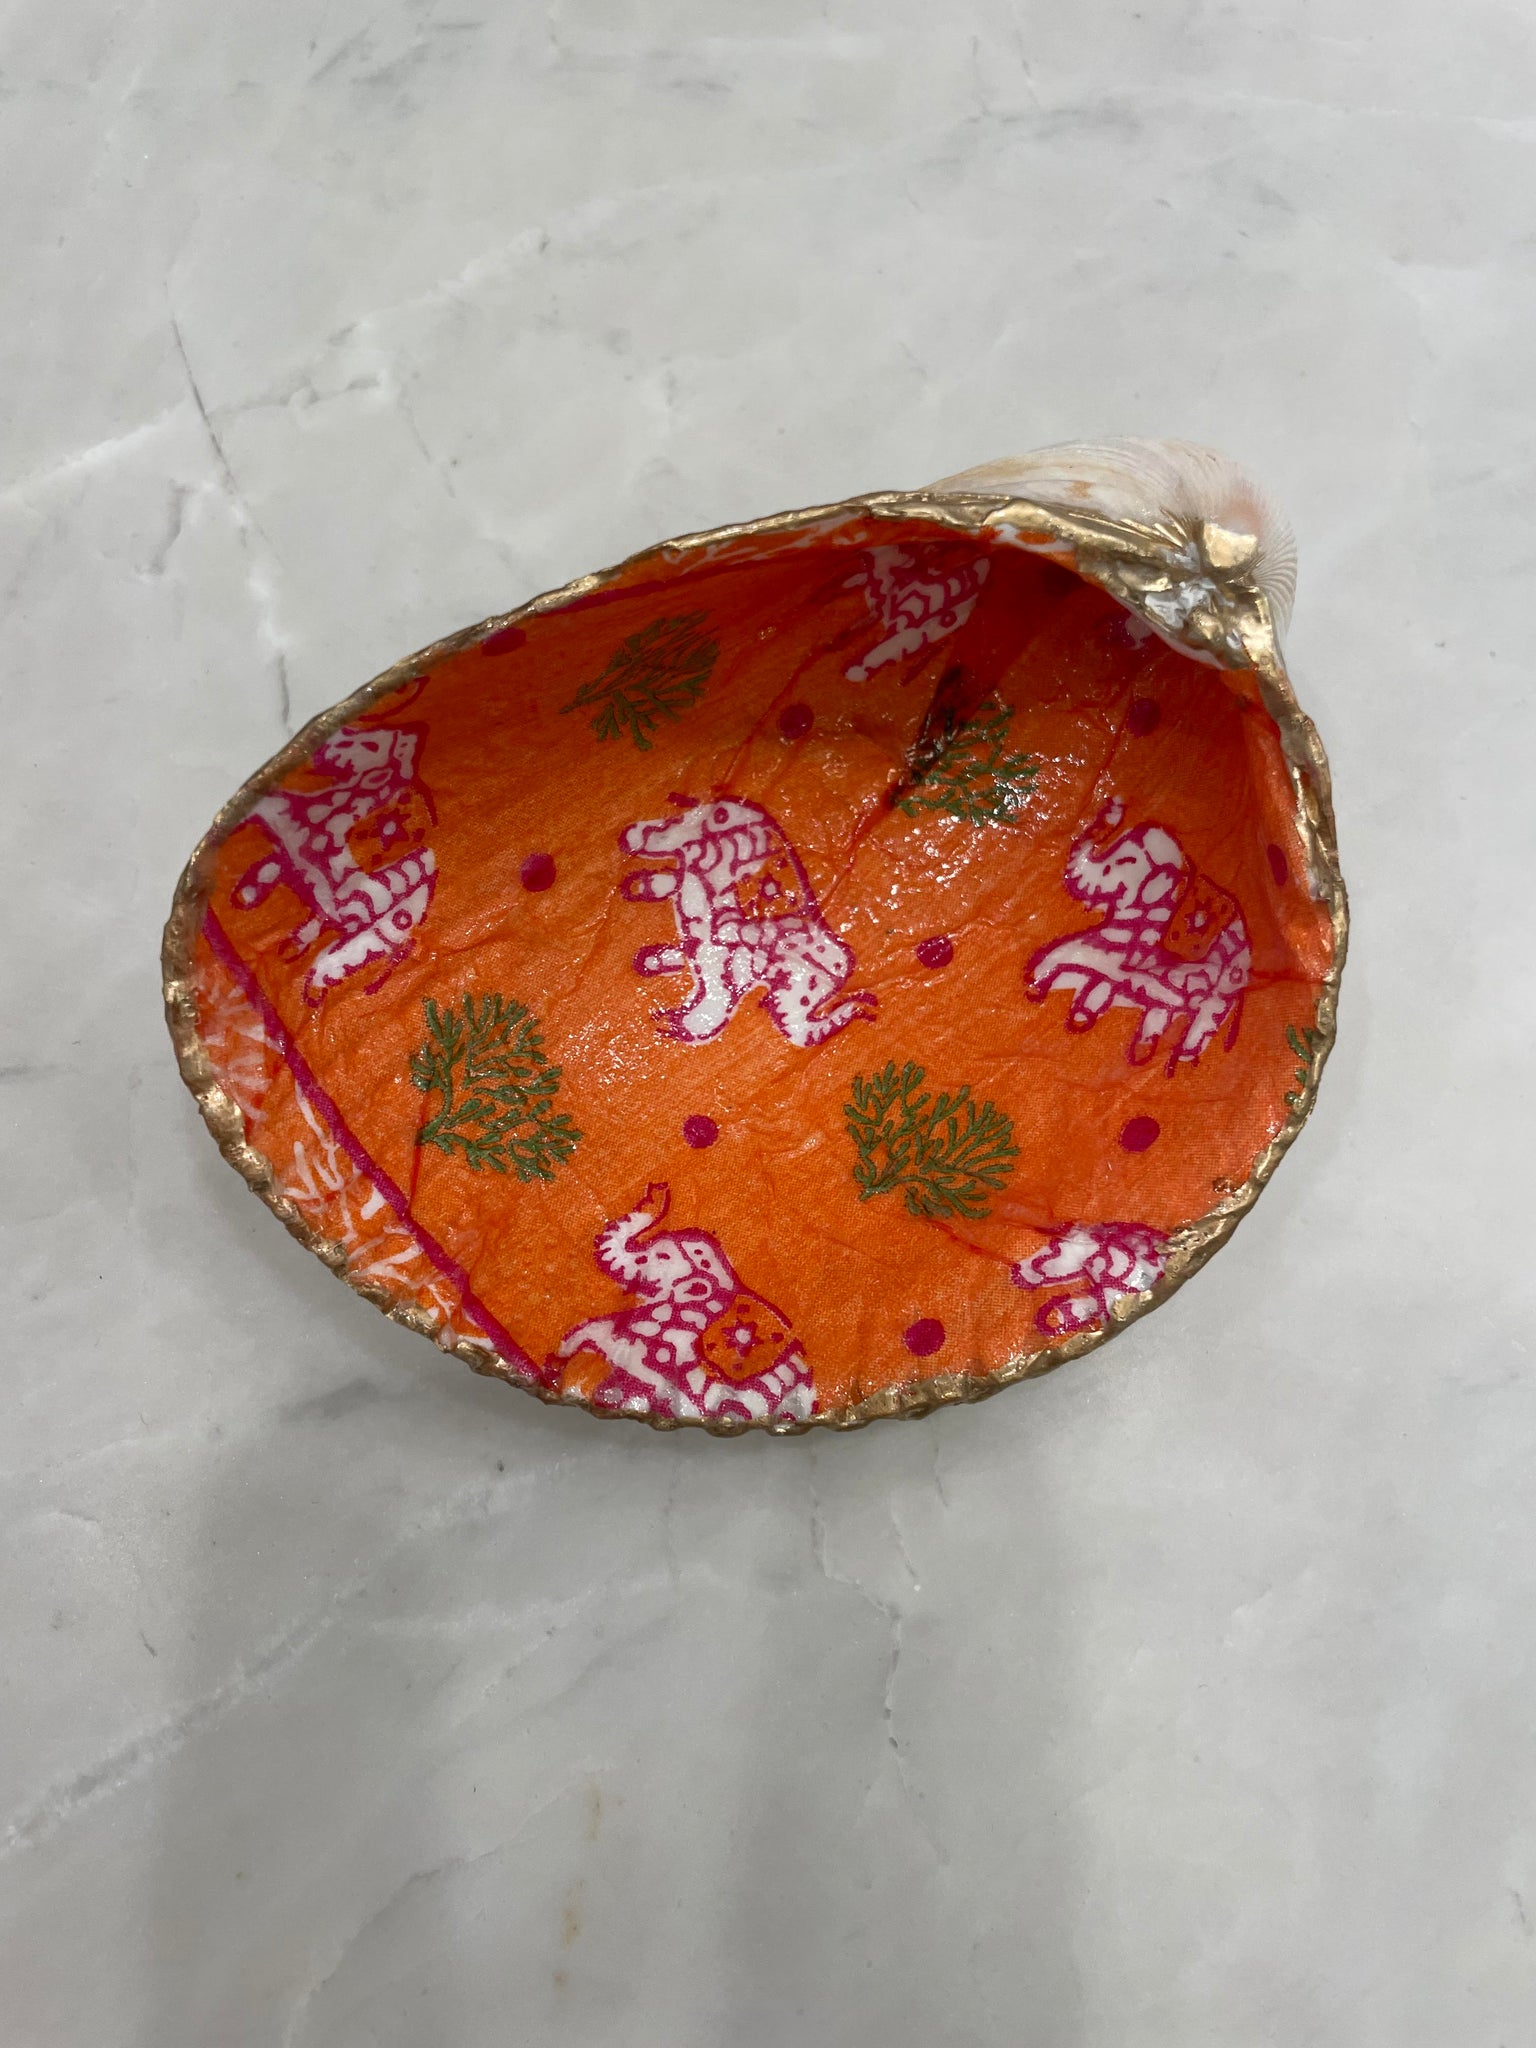 Gifts from the Sea - Shell Dish - Large